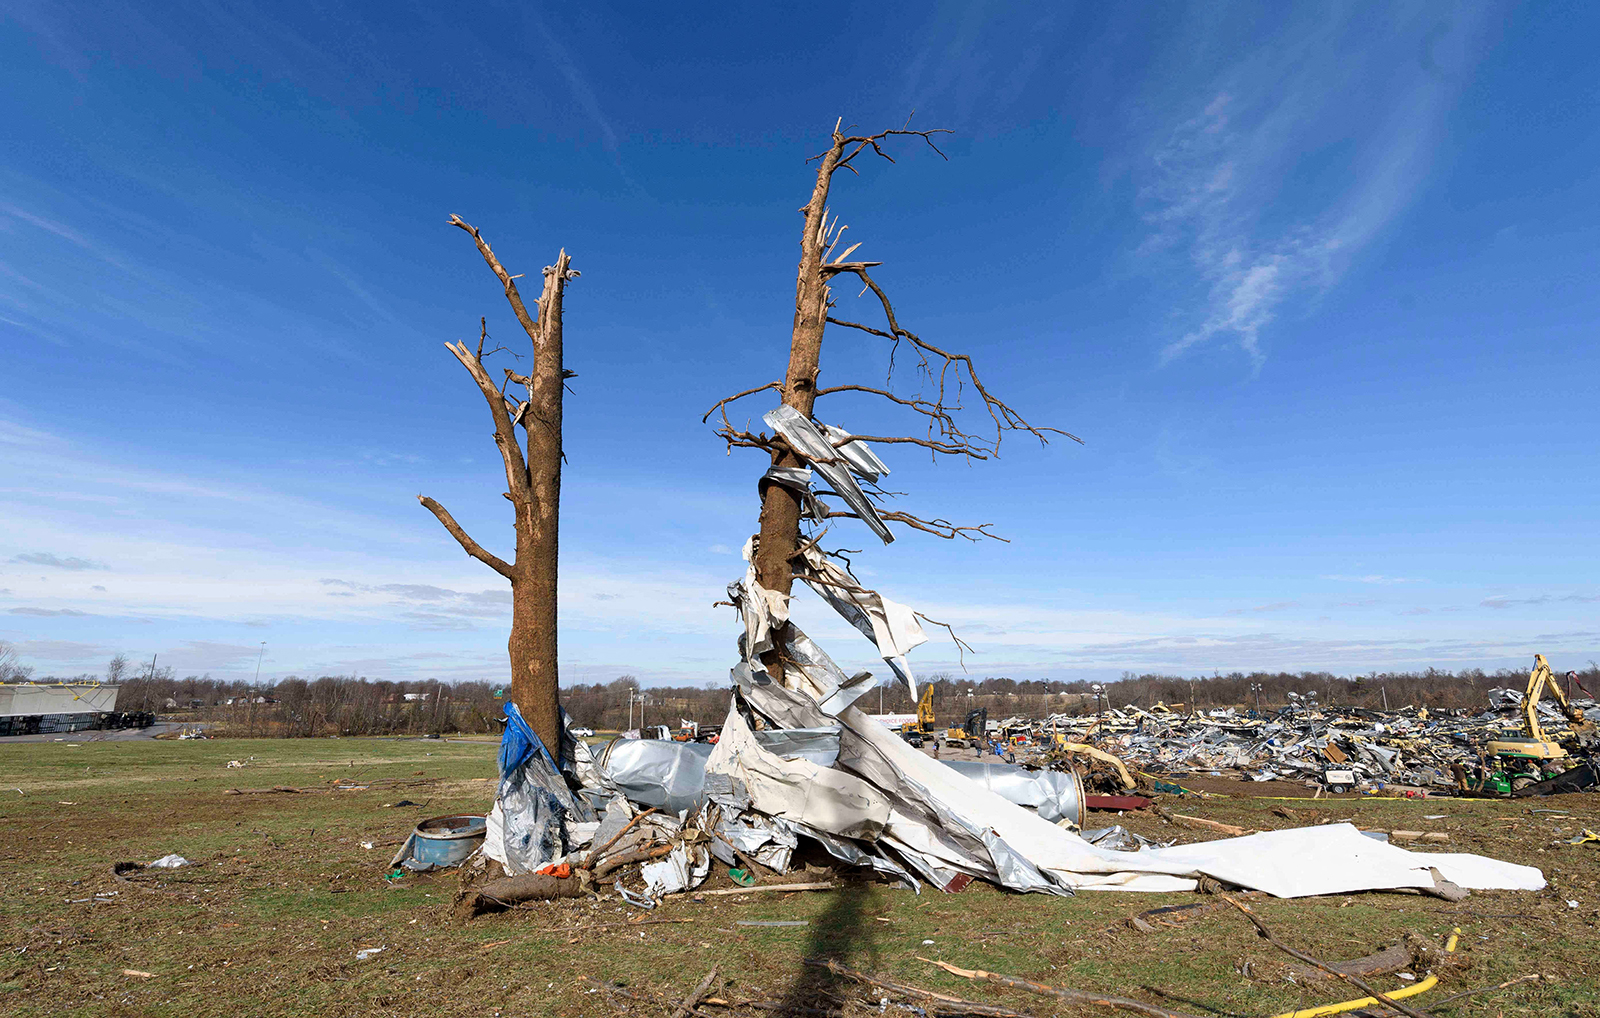 Debris is wrapped around damaged trees as emergency workers search through what is left of the Mayfield Consumer Products Candle Factory after it was destroyed by a tornado in Mayfield, Kentucky, on December 11. (John Amis/AFP/Getty Images)